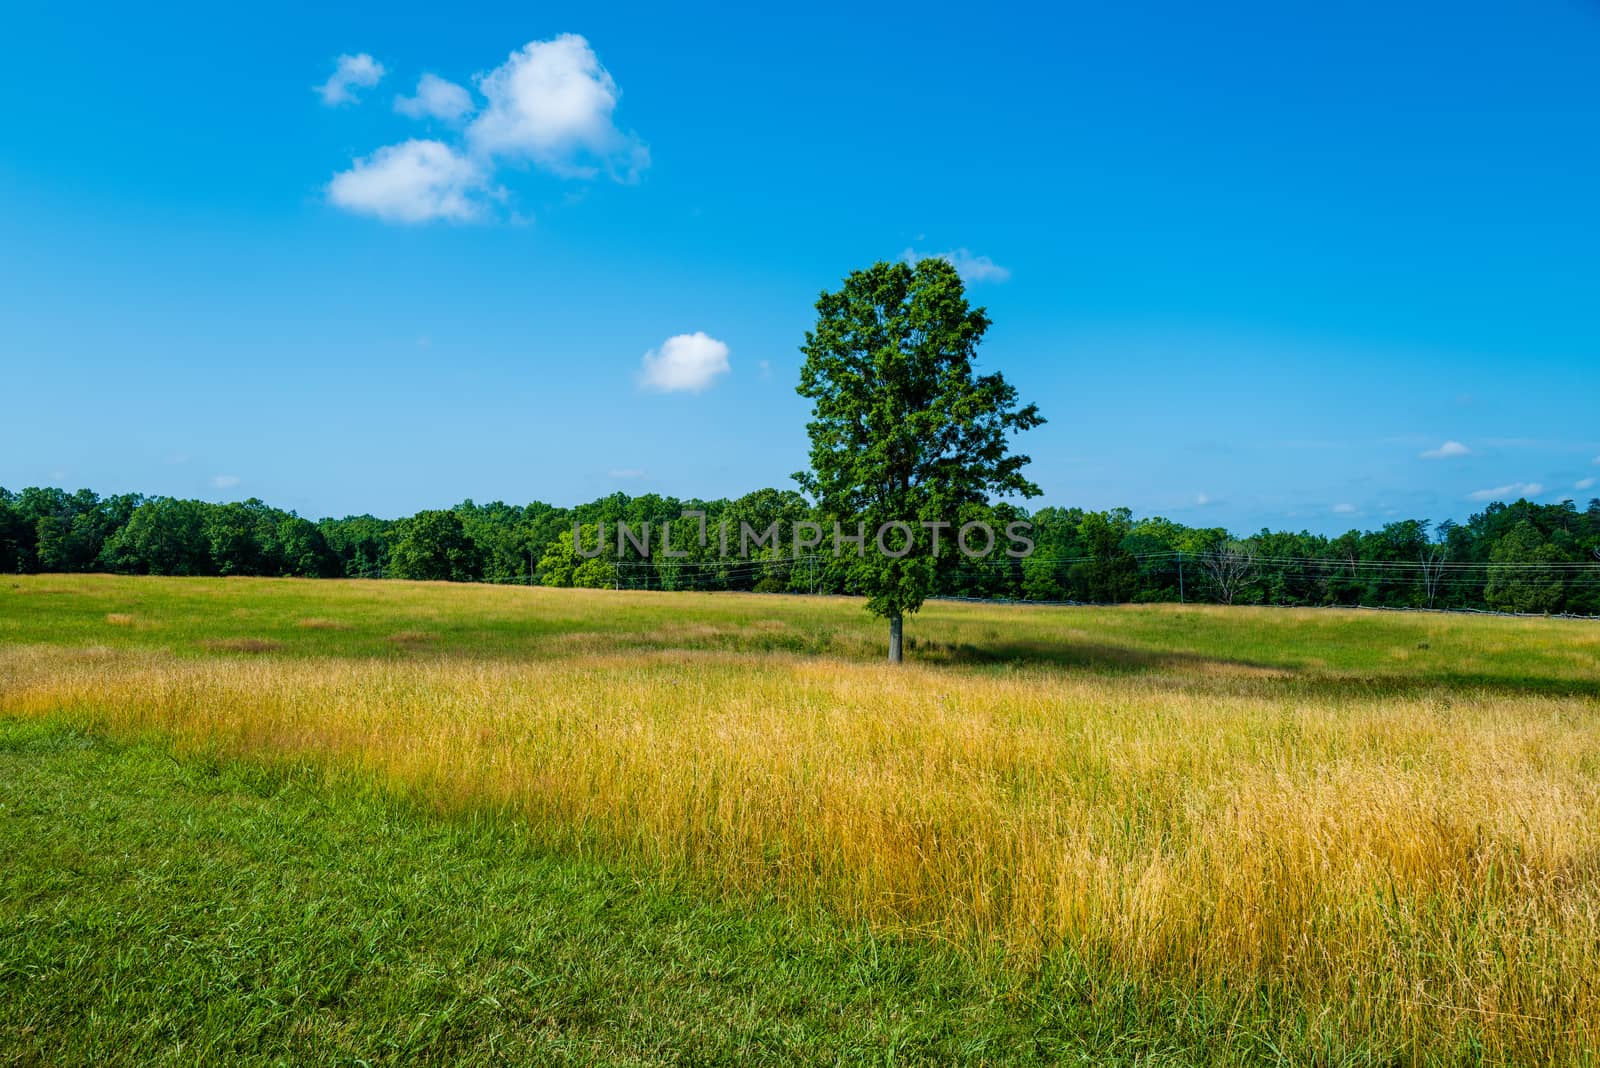 A wide angle photo of a solitary tree in the field at Battlefield National Park in Manassas, the site of the Battle of Bull Run.